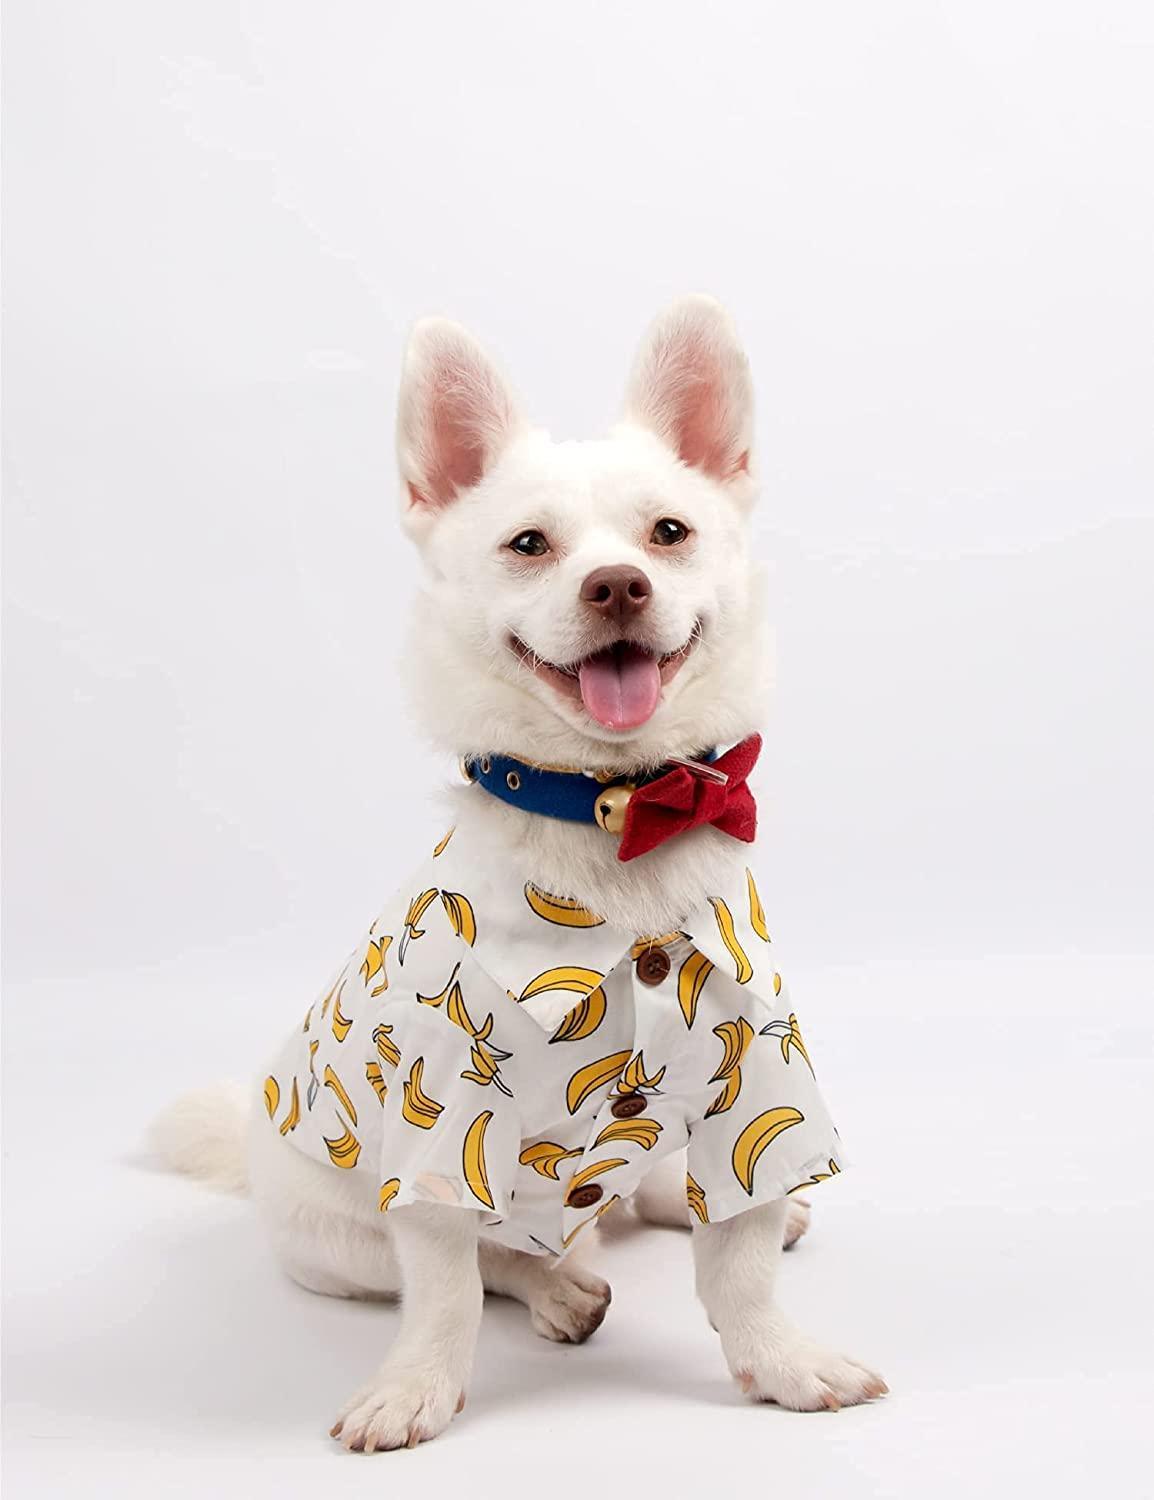 Dog Shirt(s) - Cute Dog Clothes for Small Medium Large Dogs Cats Birthday Party and Holiday Photos